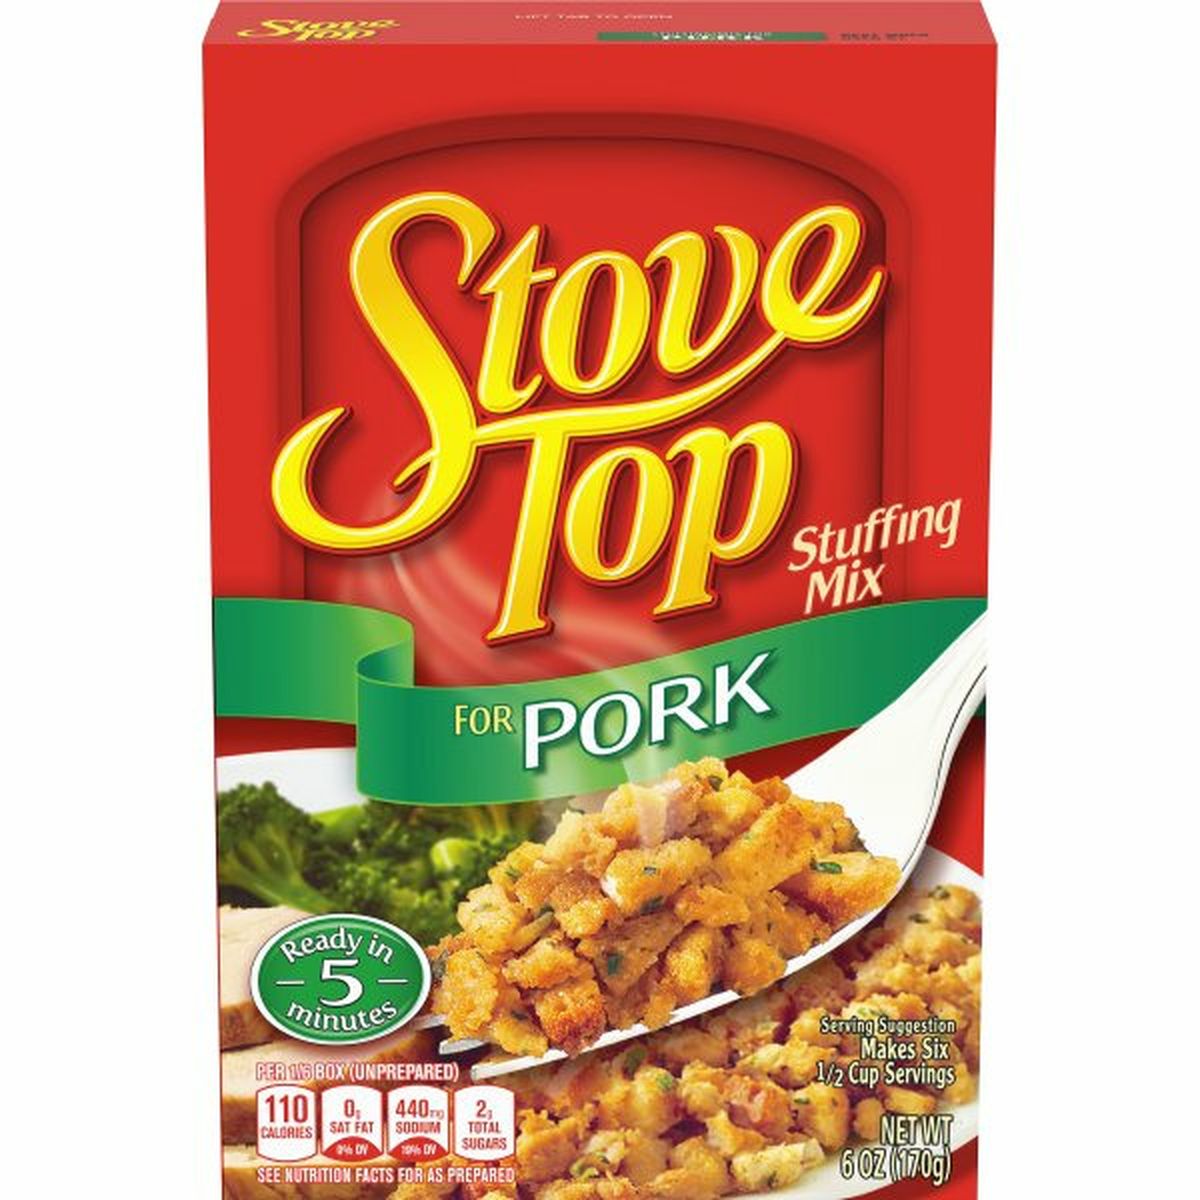 Calories in Kraft Stove Top Stuffing Mix for Pork